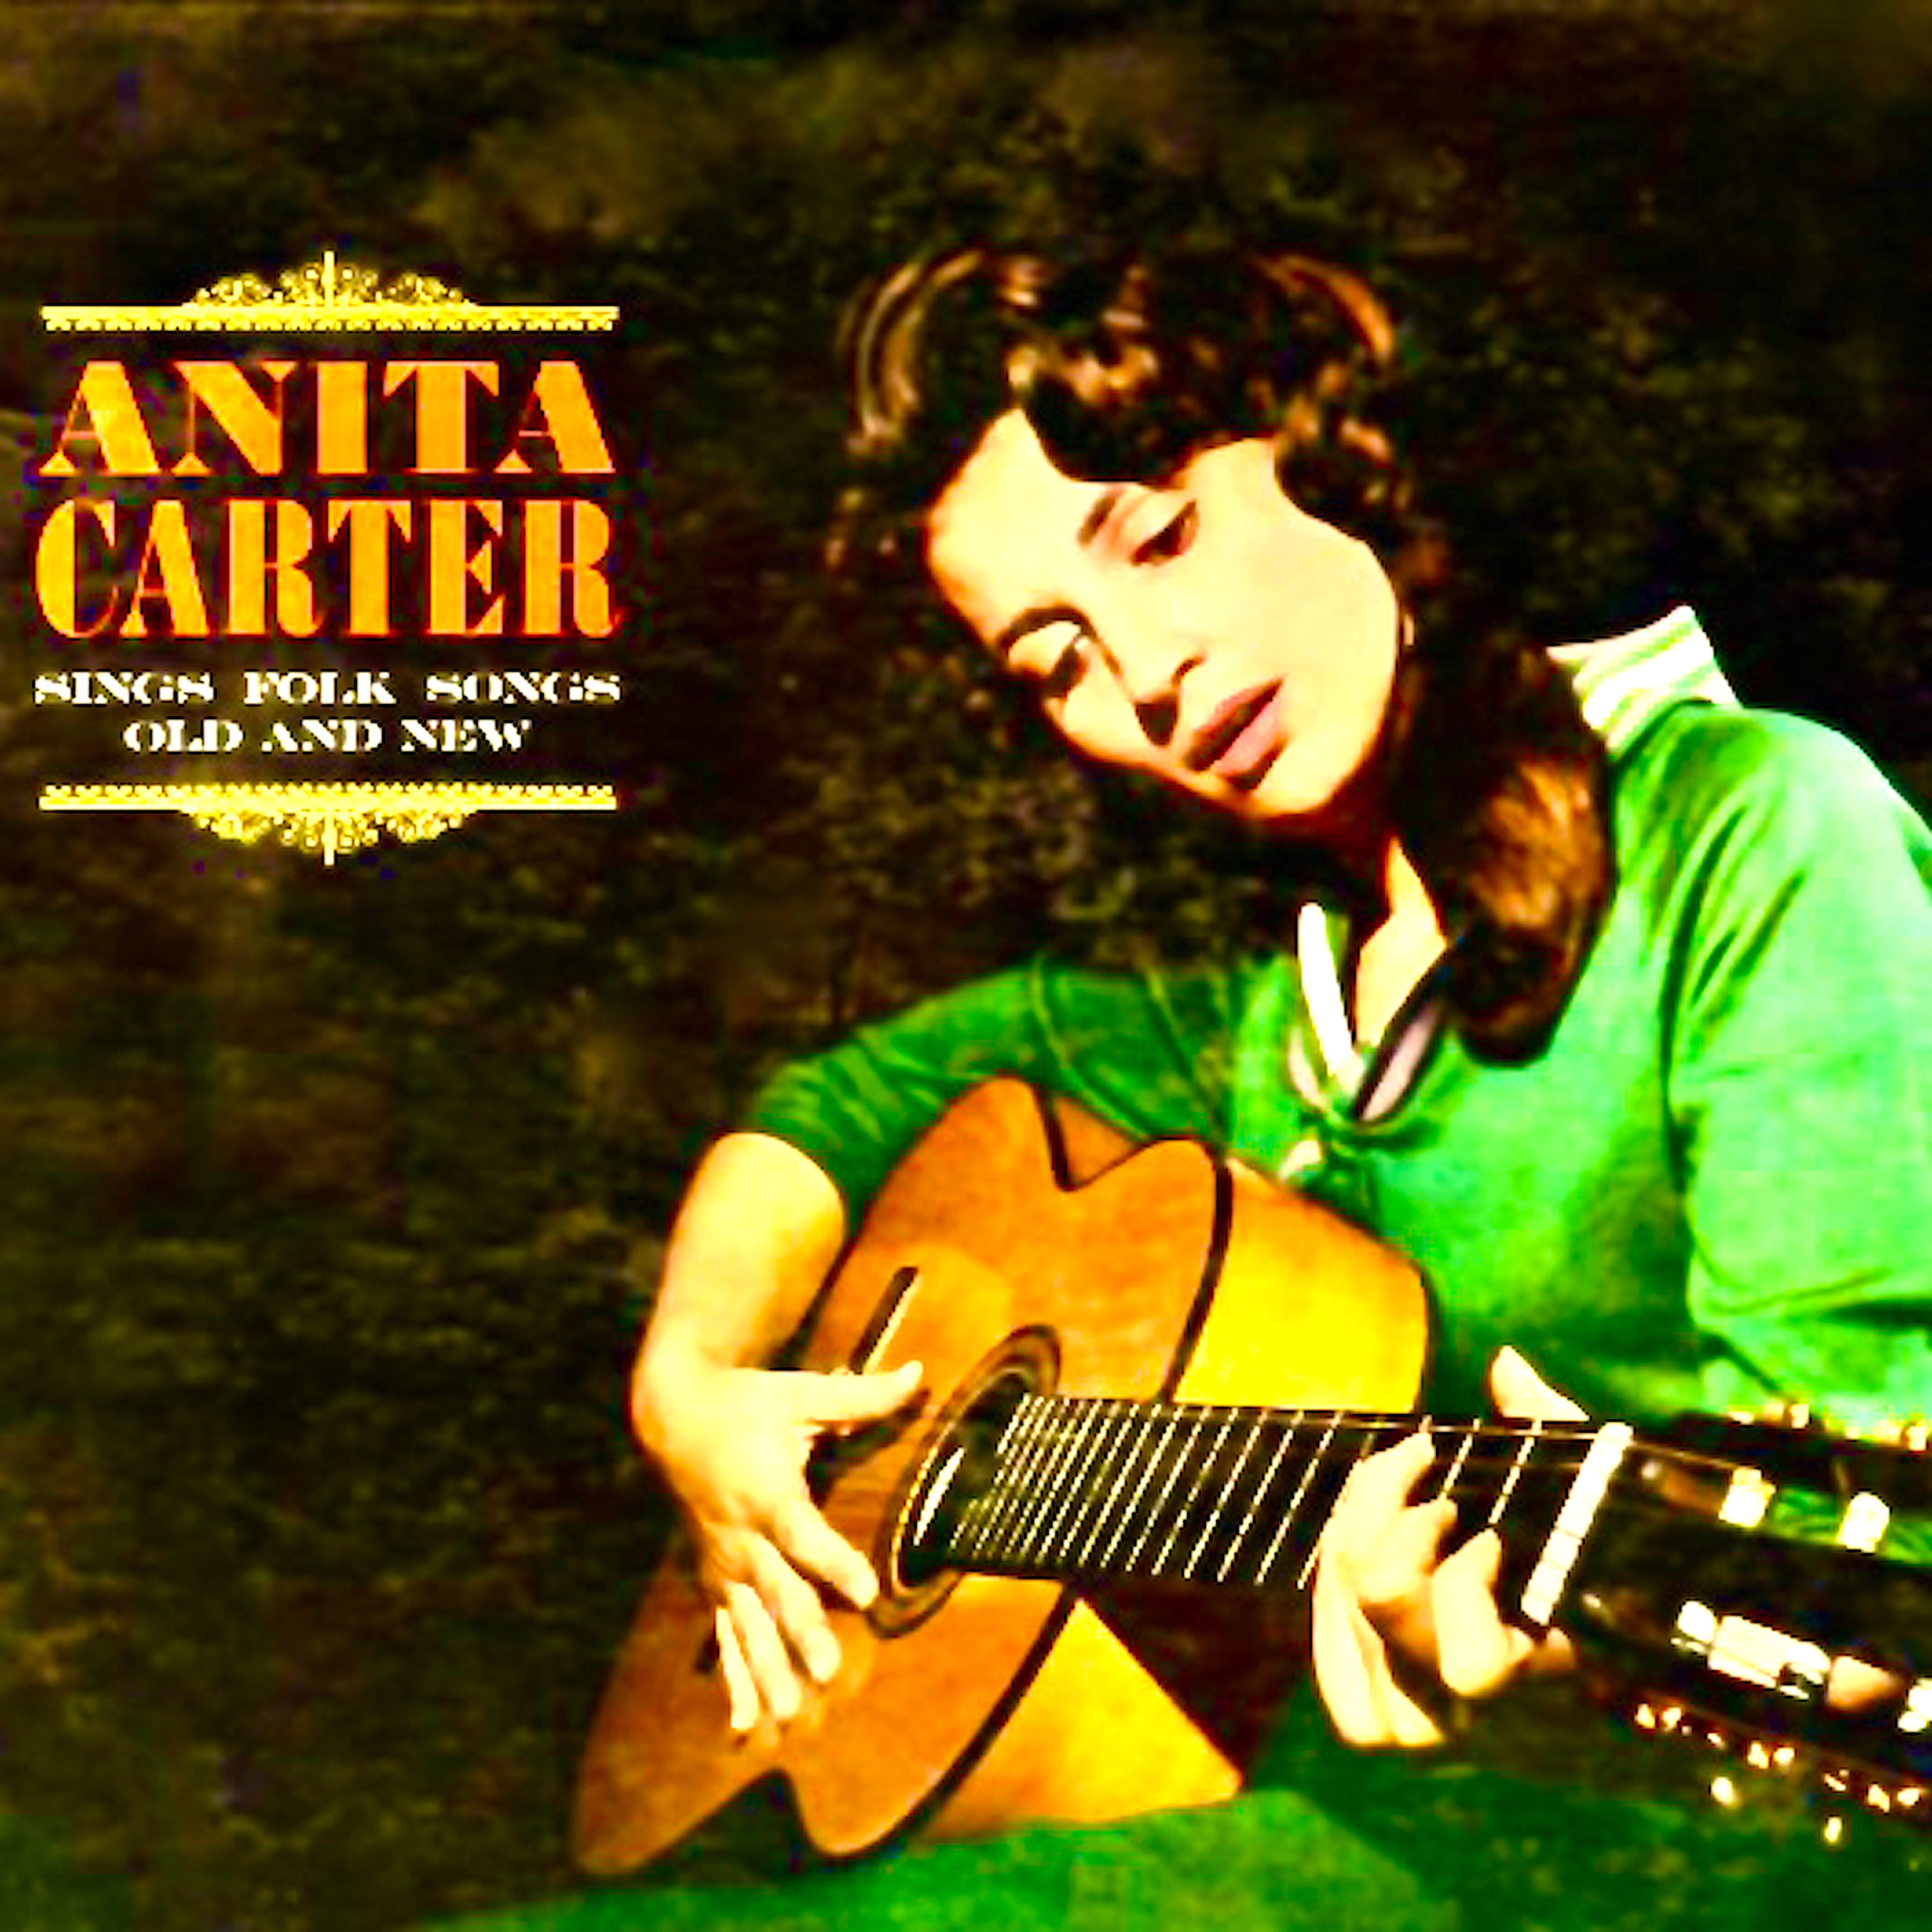 Anita Carter – Songs Old And New (1962/2021) [FLAC 24bit/96kHz]